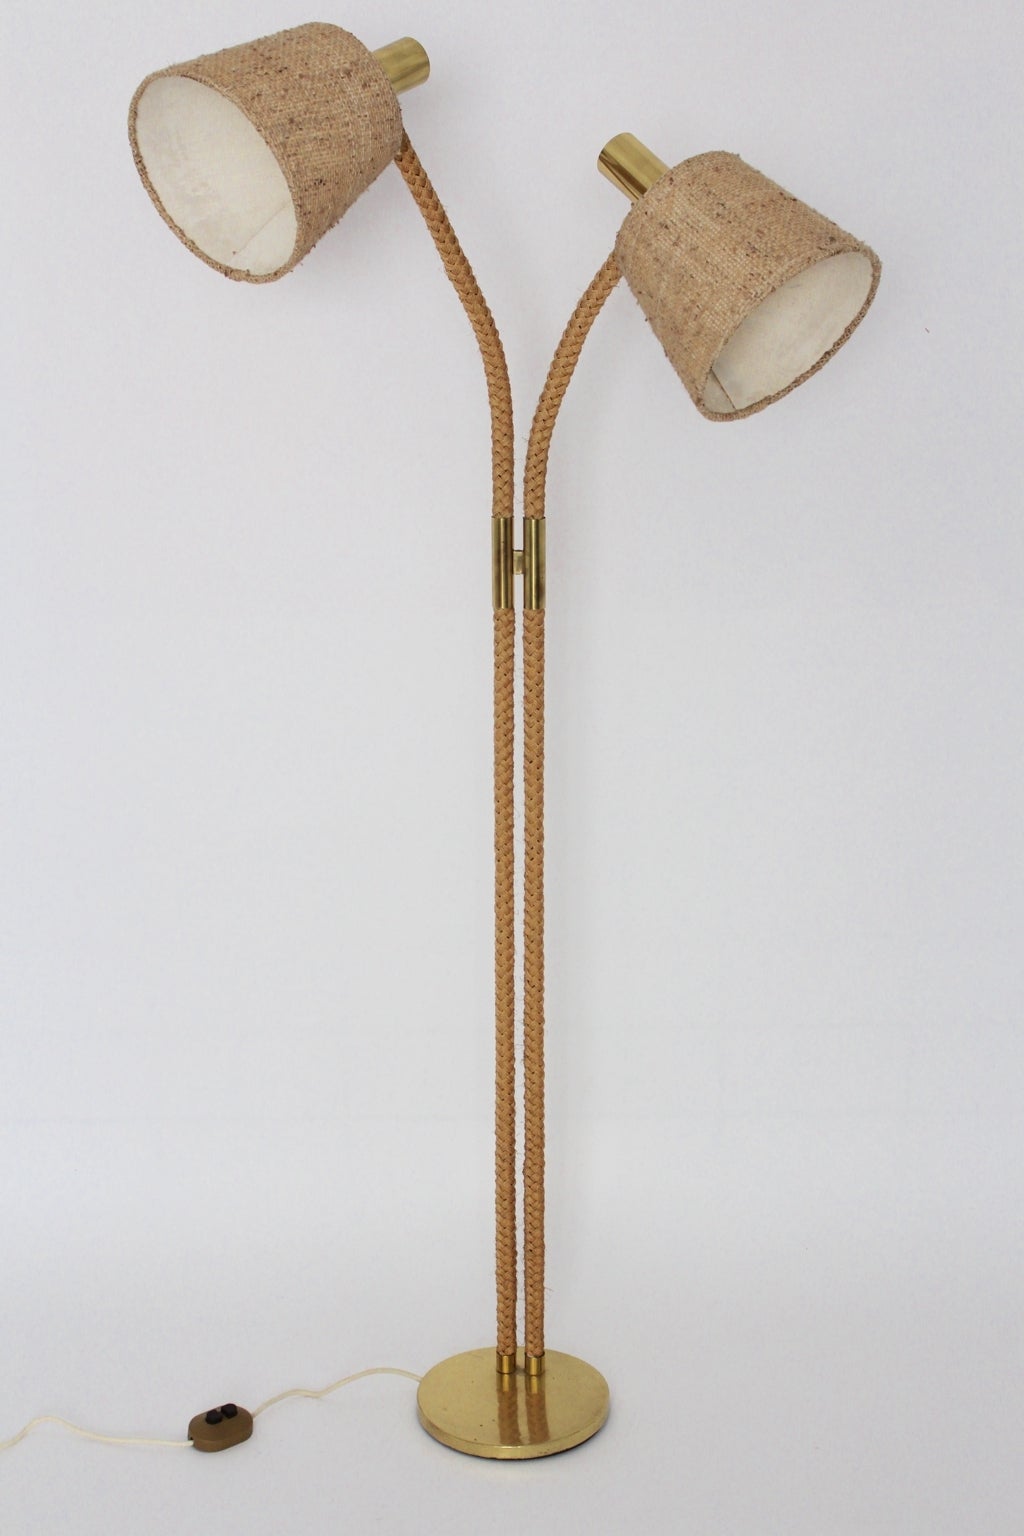 This presented Mid-Century Modern floor lamp in the style of Adrien Audoux et Frida Minet, 1960s is taped with twisted cords and shows also brassed details.
Also the two shades, which are formed like a baskets, are covered with natural canvas and